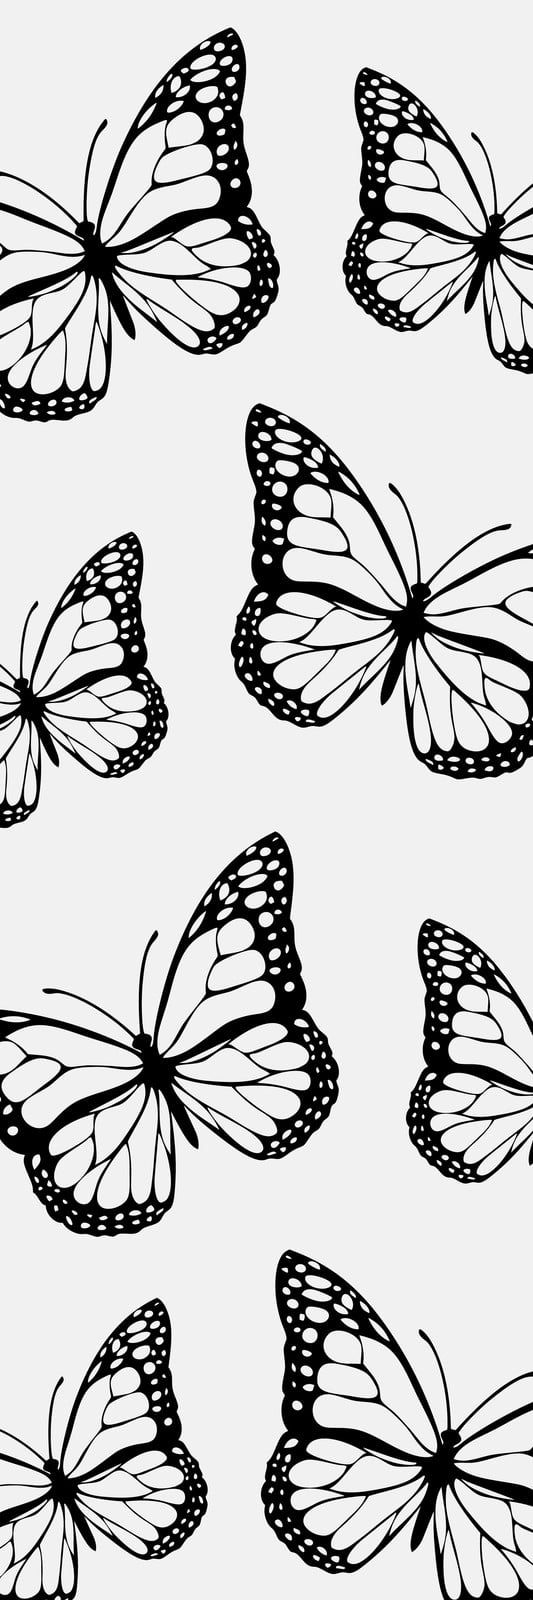 How to Draw Butterfly Easy | Monarch butterfly drawing and coloring | Art  Tutorial - YouTube